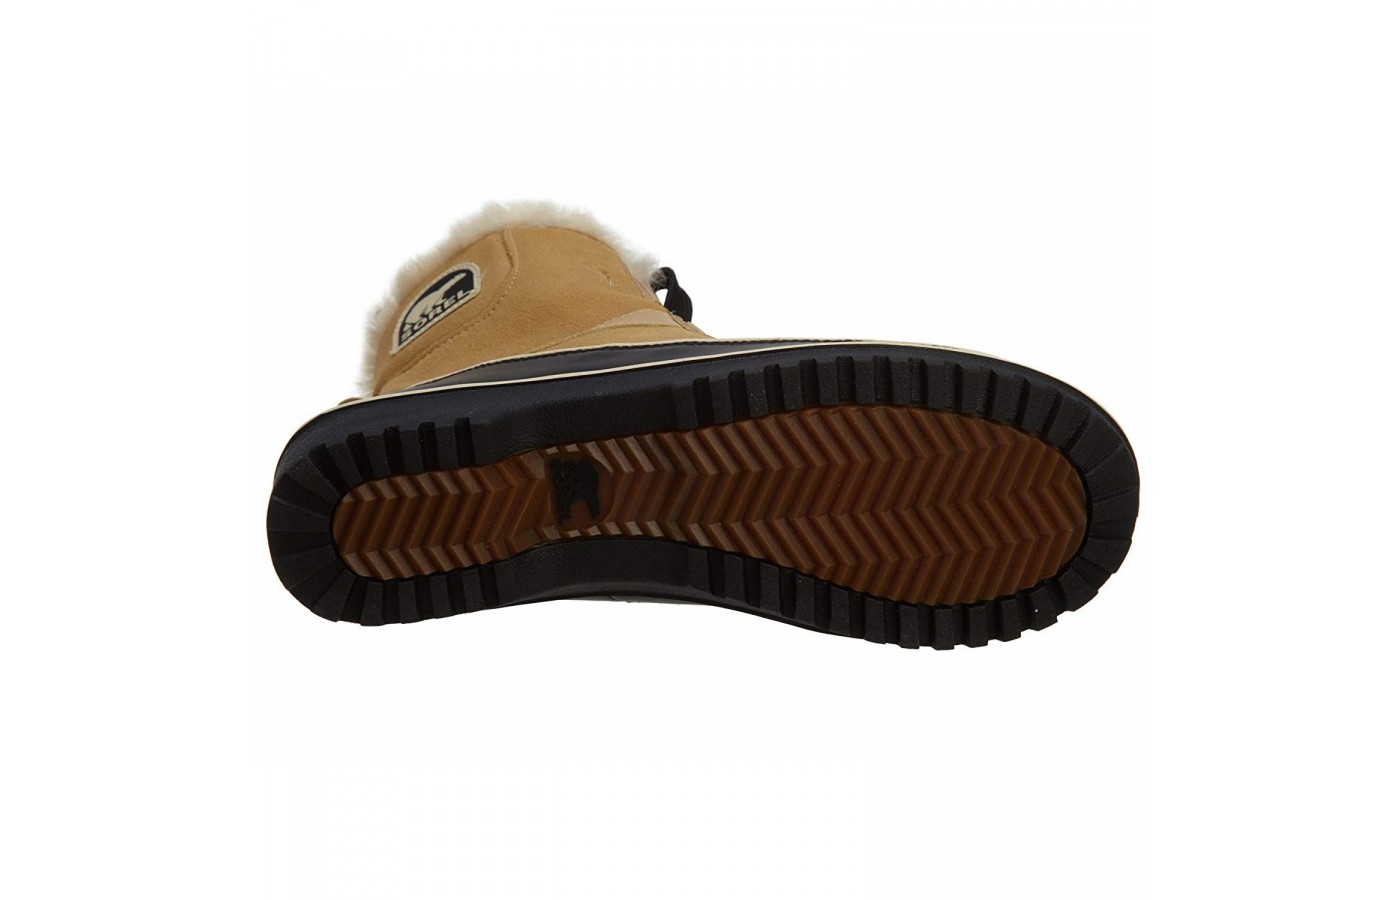 The Sorel Tivoli II offers a rubber outsole for protection and grip.